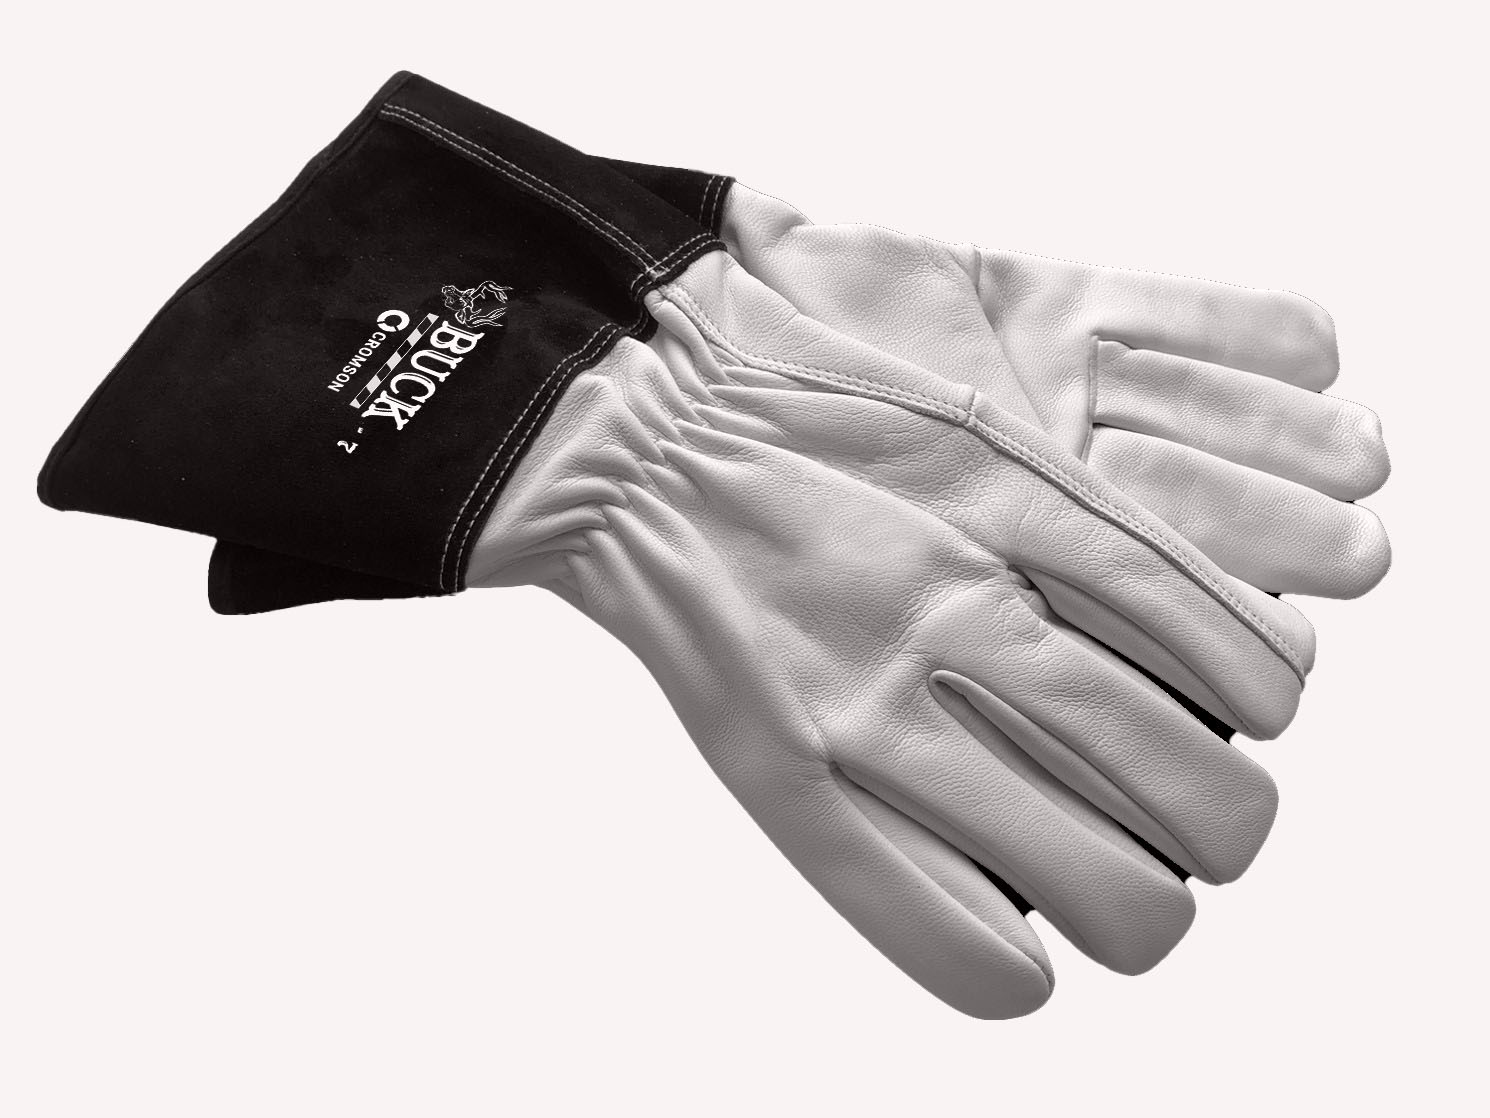 CR8431 Welding gloves, with Kevlar lining ANSI A4 Cut rated, Arc flash resistant -  BUCK  Size : M